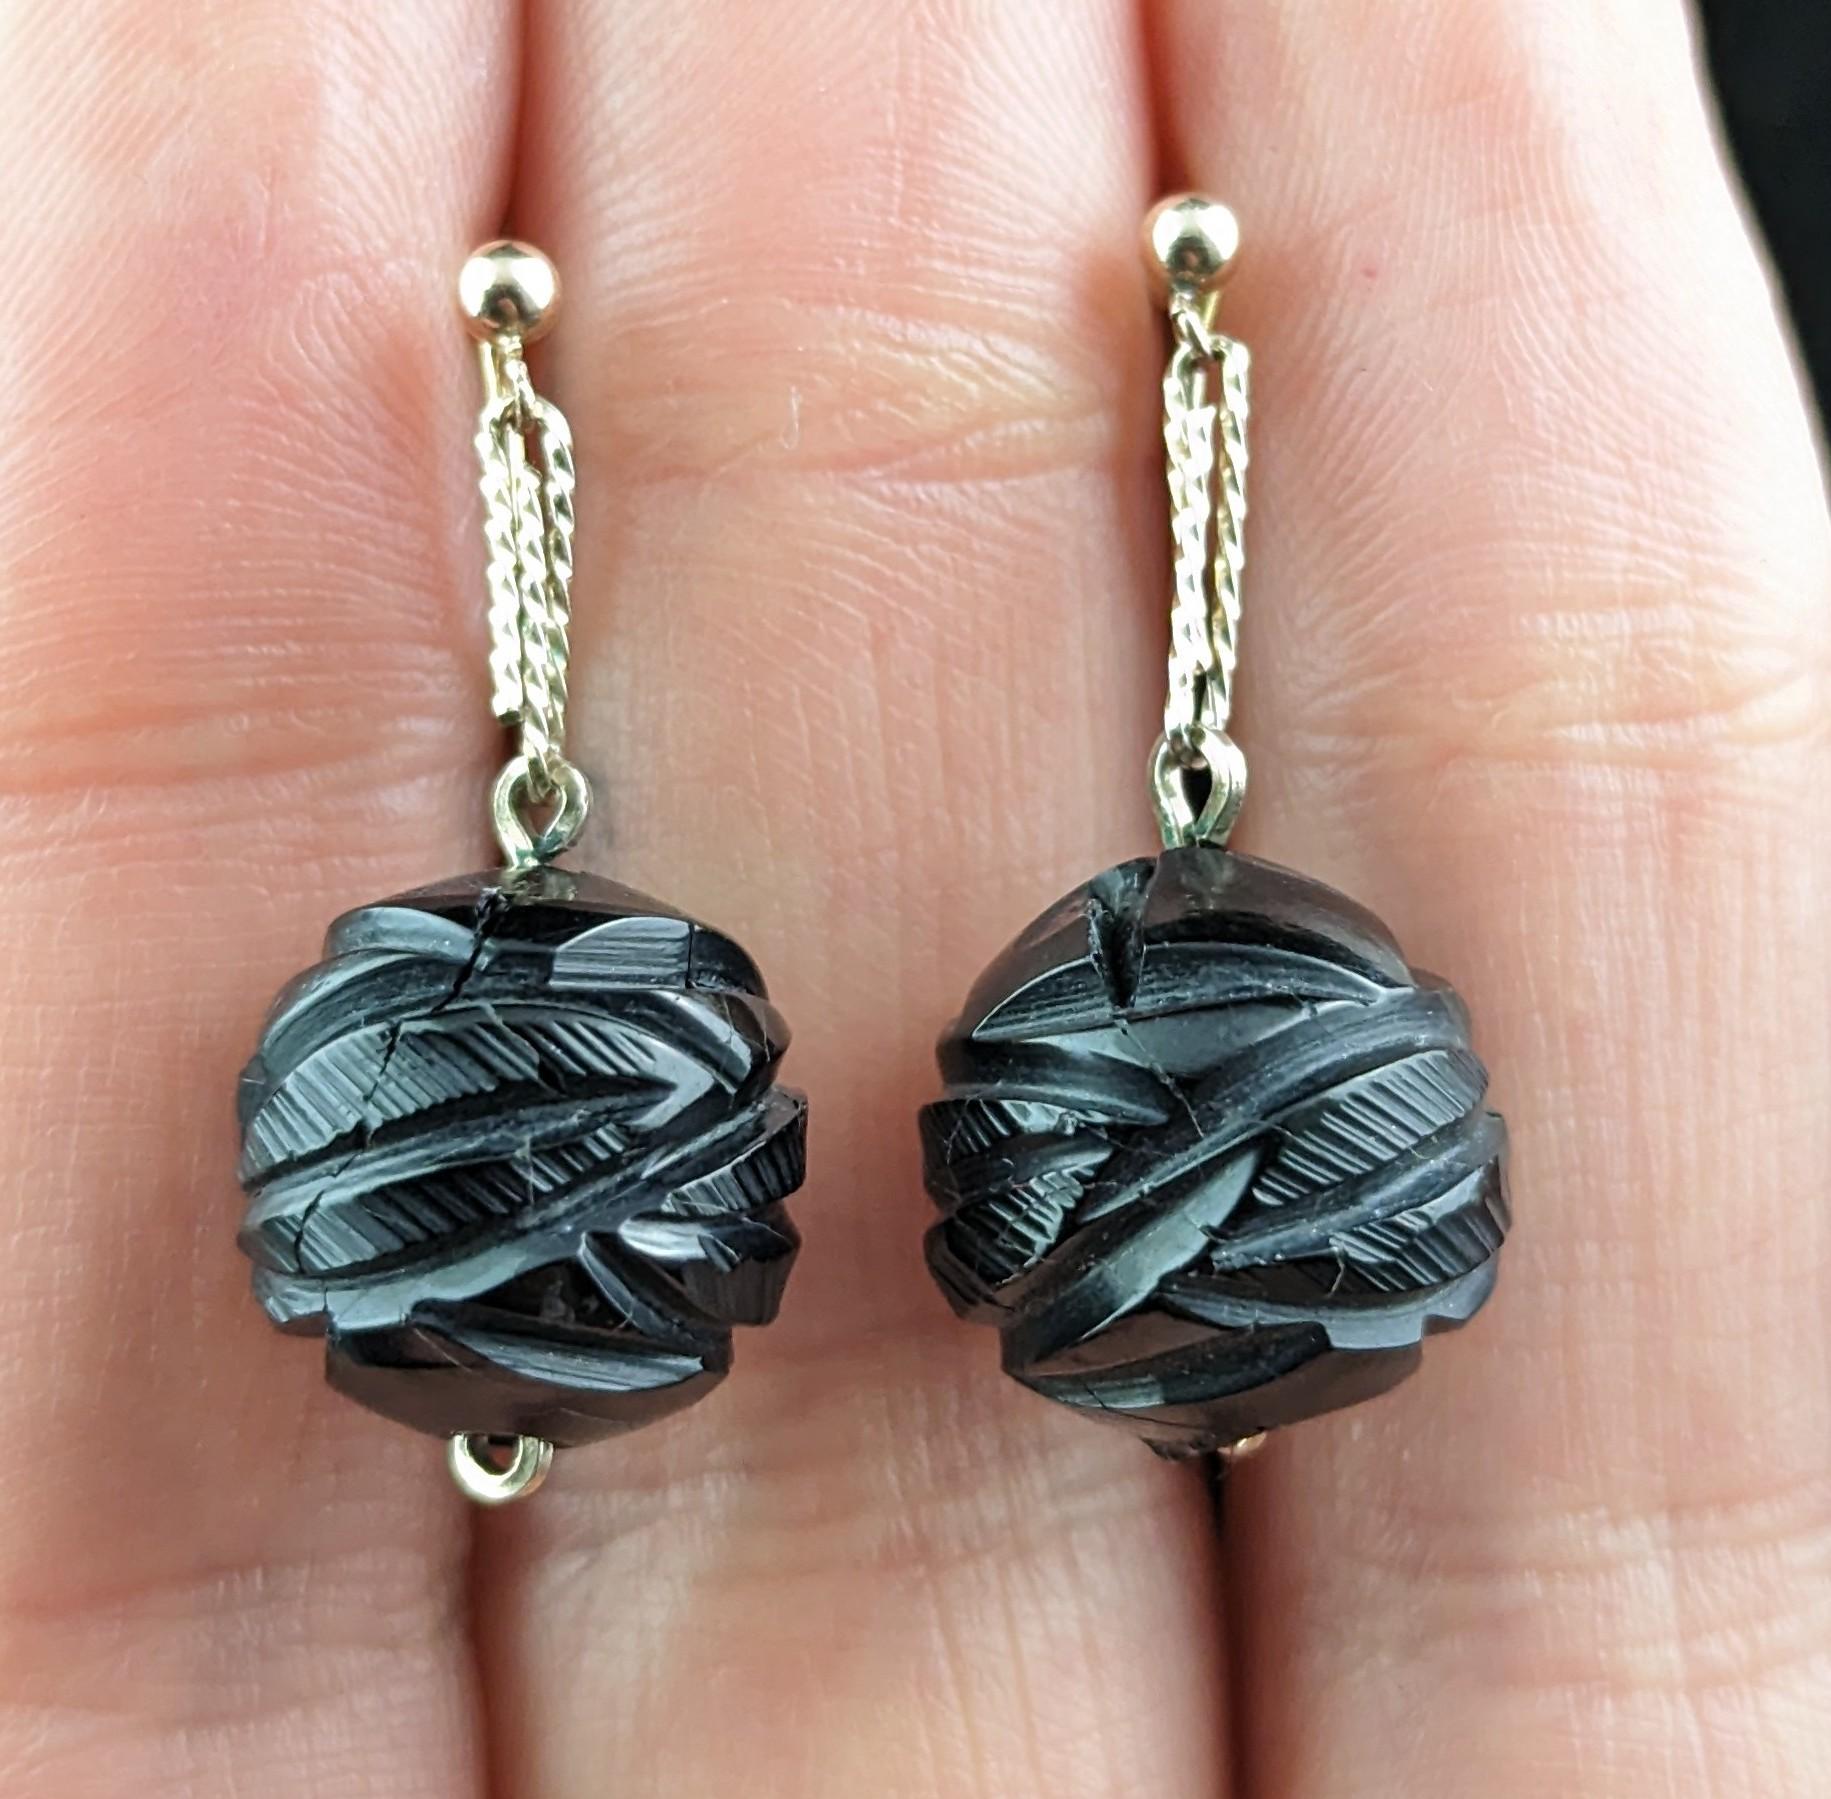 These delightful Victorian Whitby Jet earrings are delicate yet bold, a great addition to your antique earrings collection.

They are made from carved Whitby Jet, each earrings featuring a heavily carved large spherical bead, they are attached to a